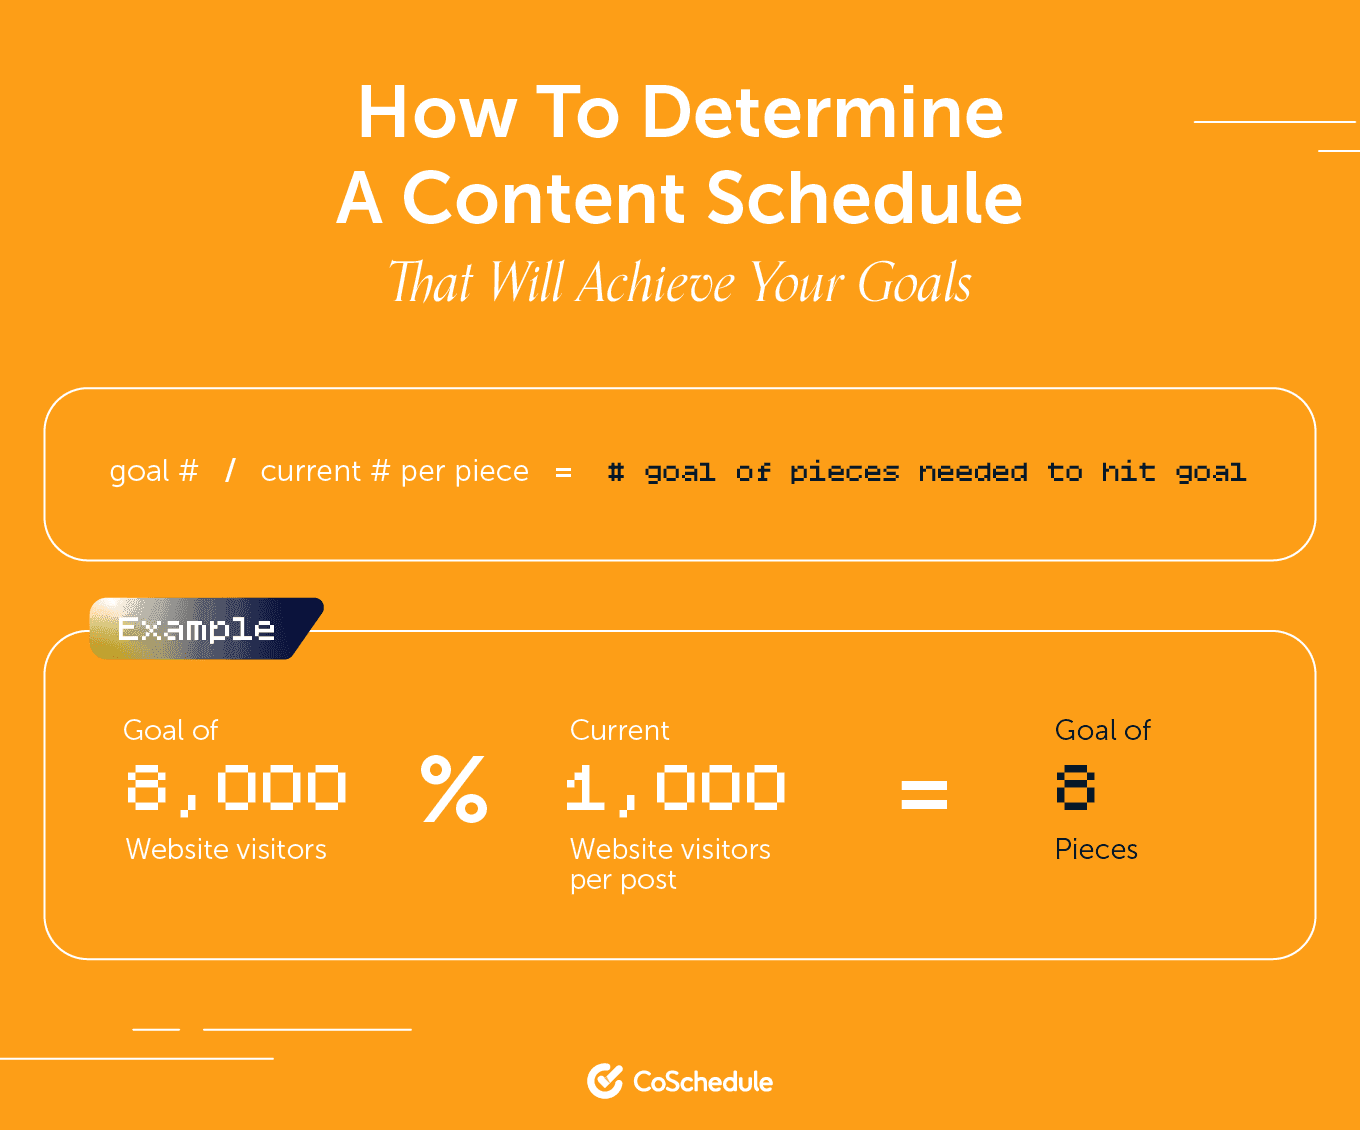 How to determine a content schedule that will achieve your goals